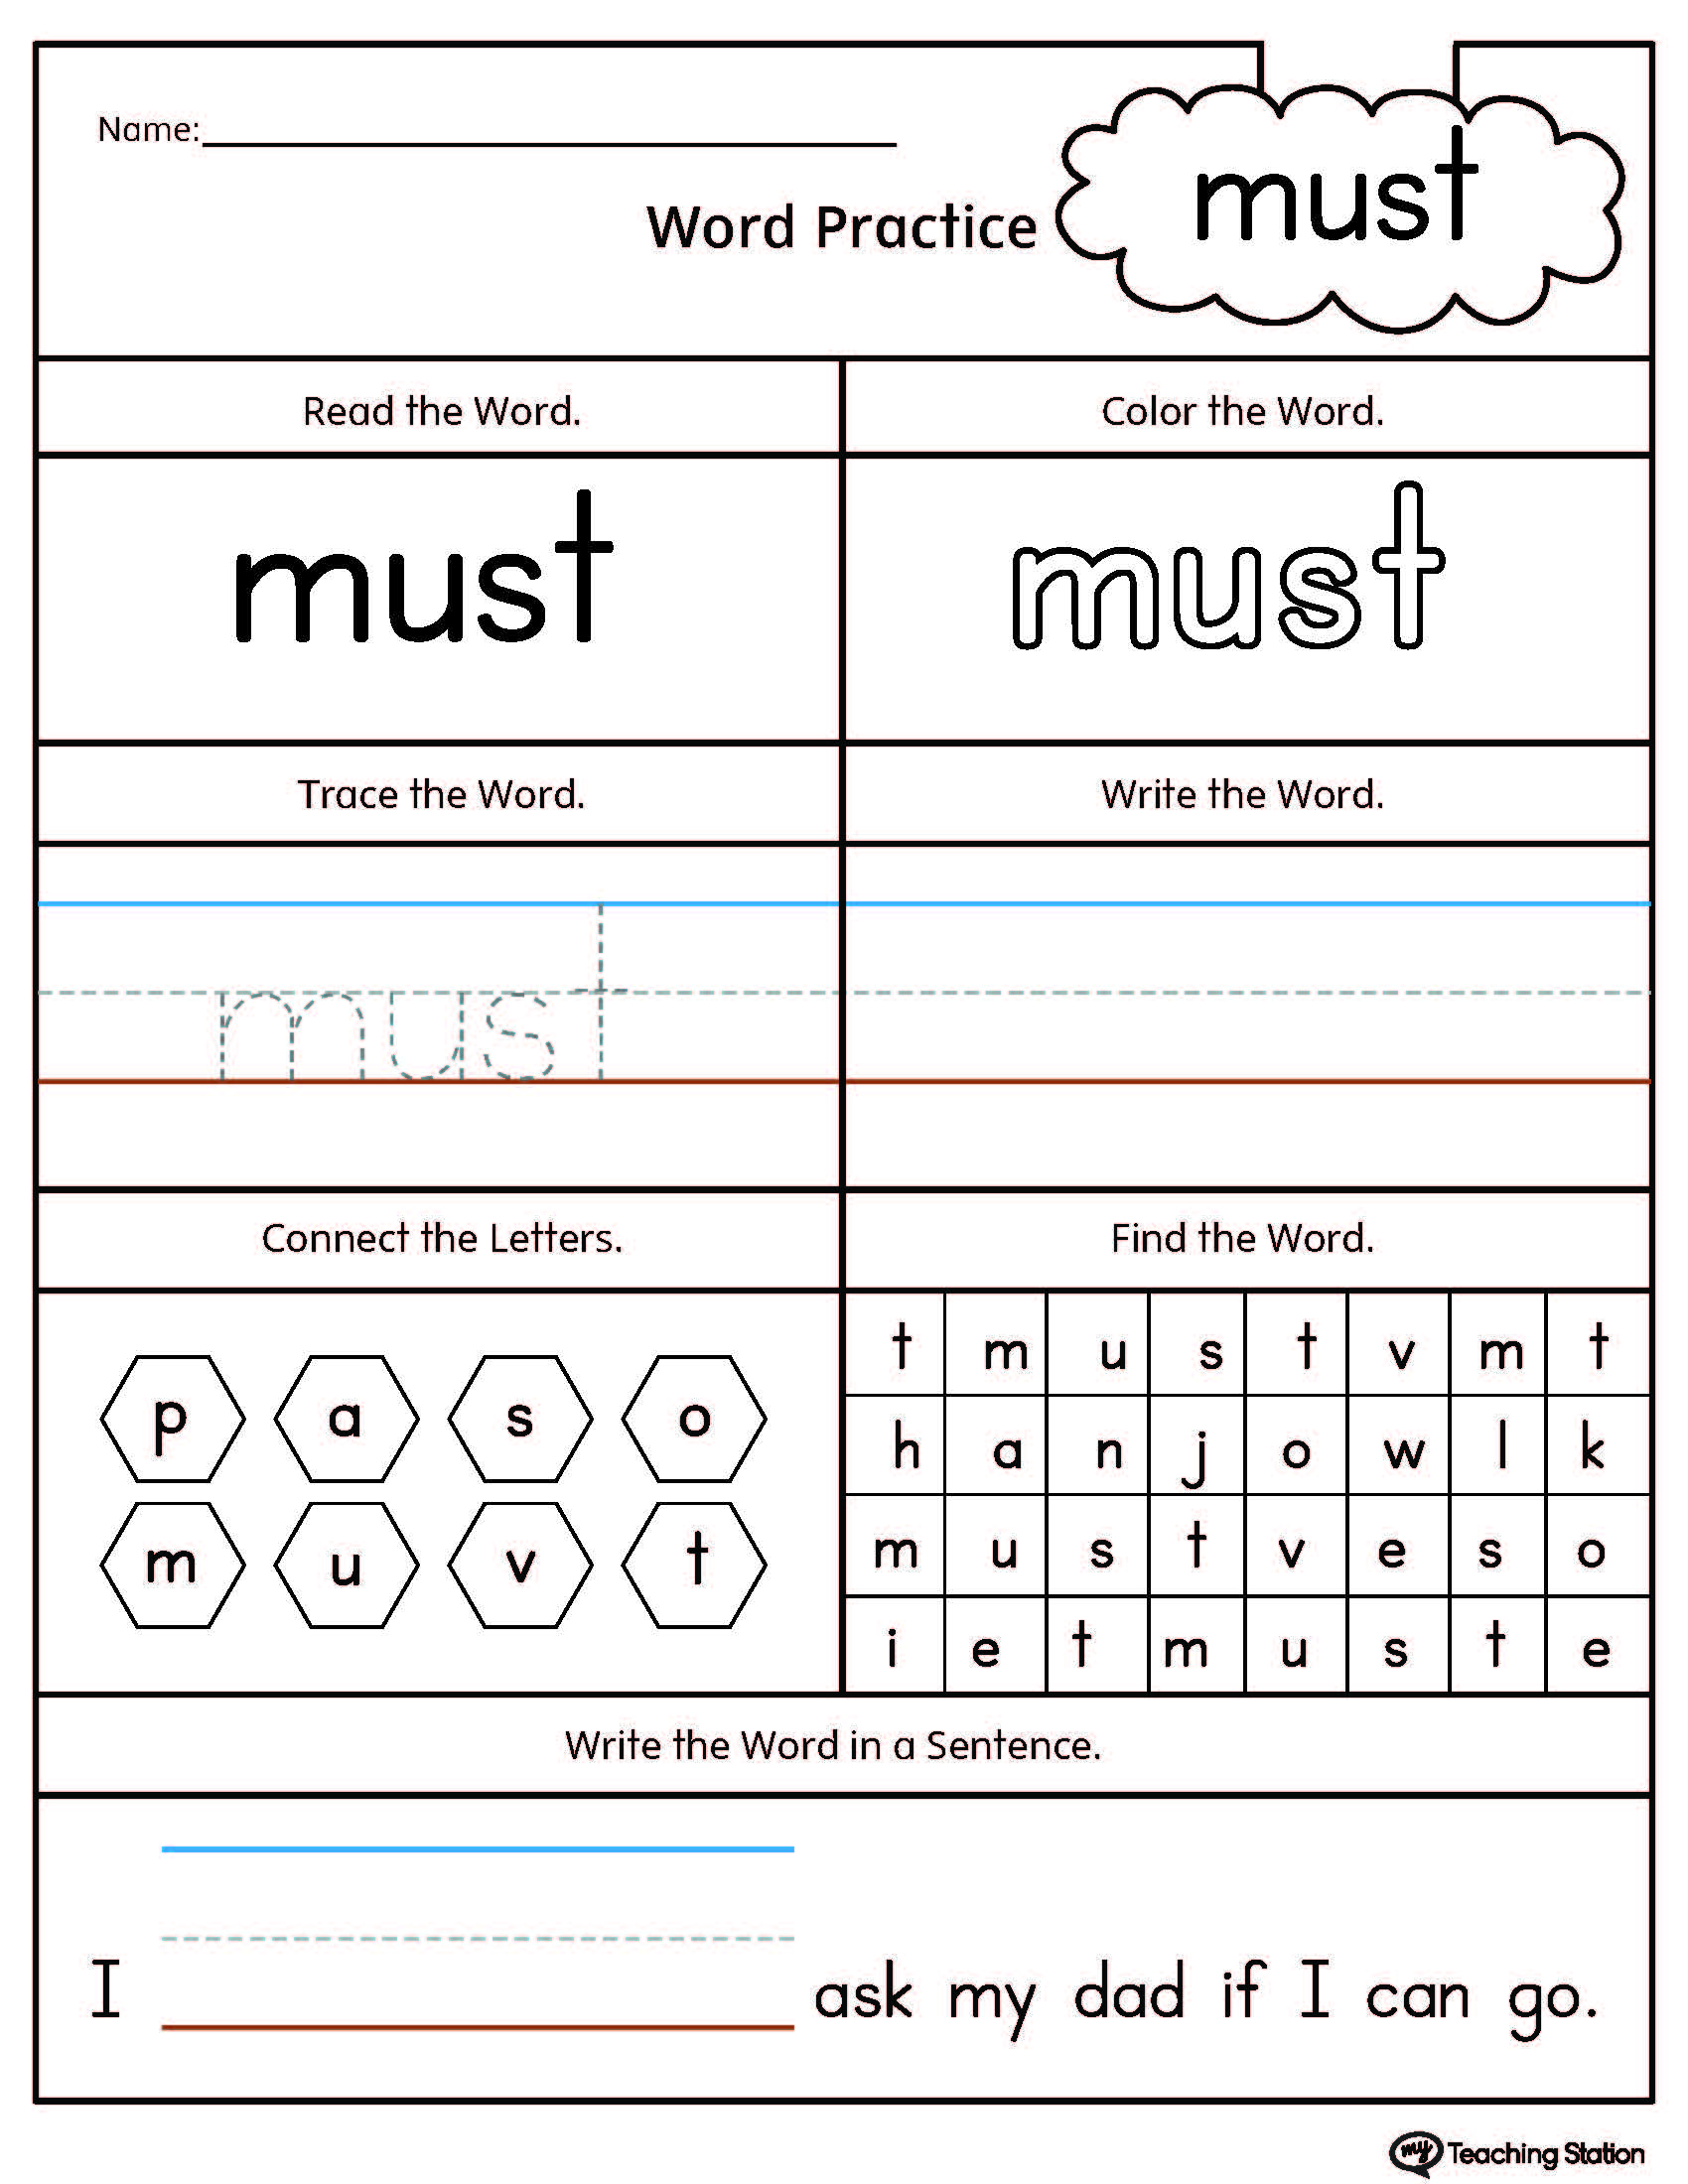 Orangeflowerpatterns 13 Sight Word A Worksheets Pictures